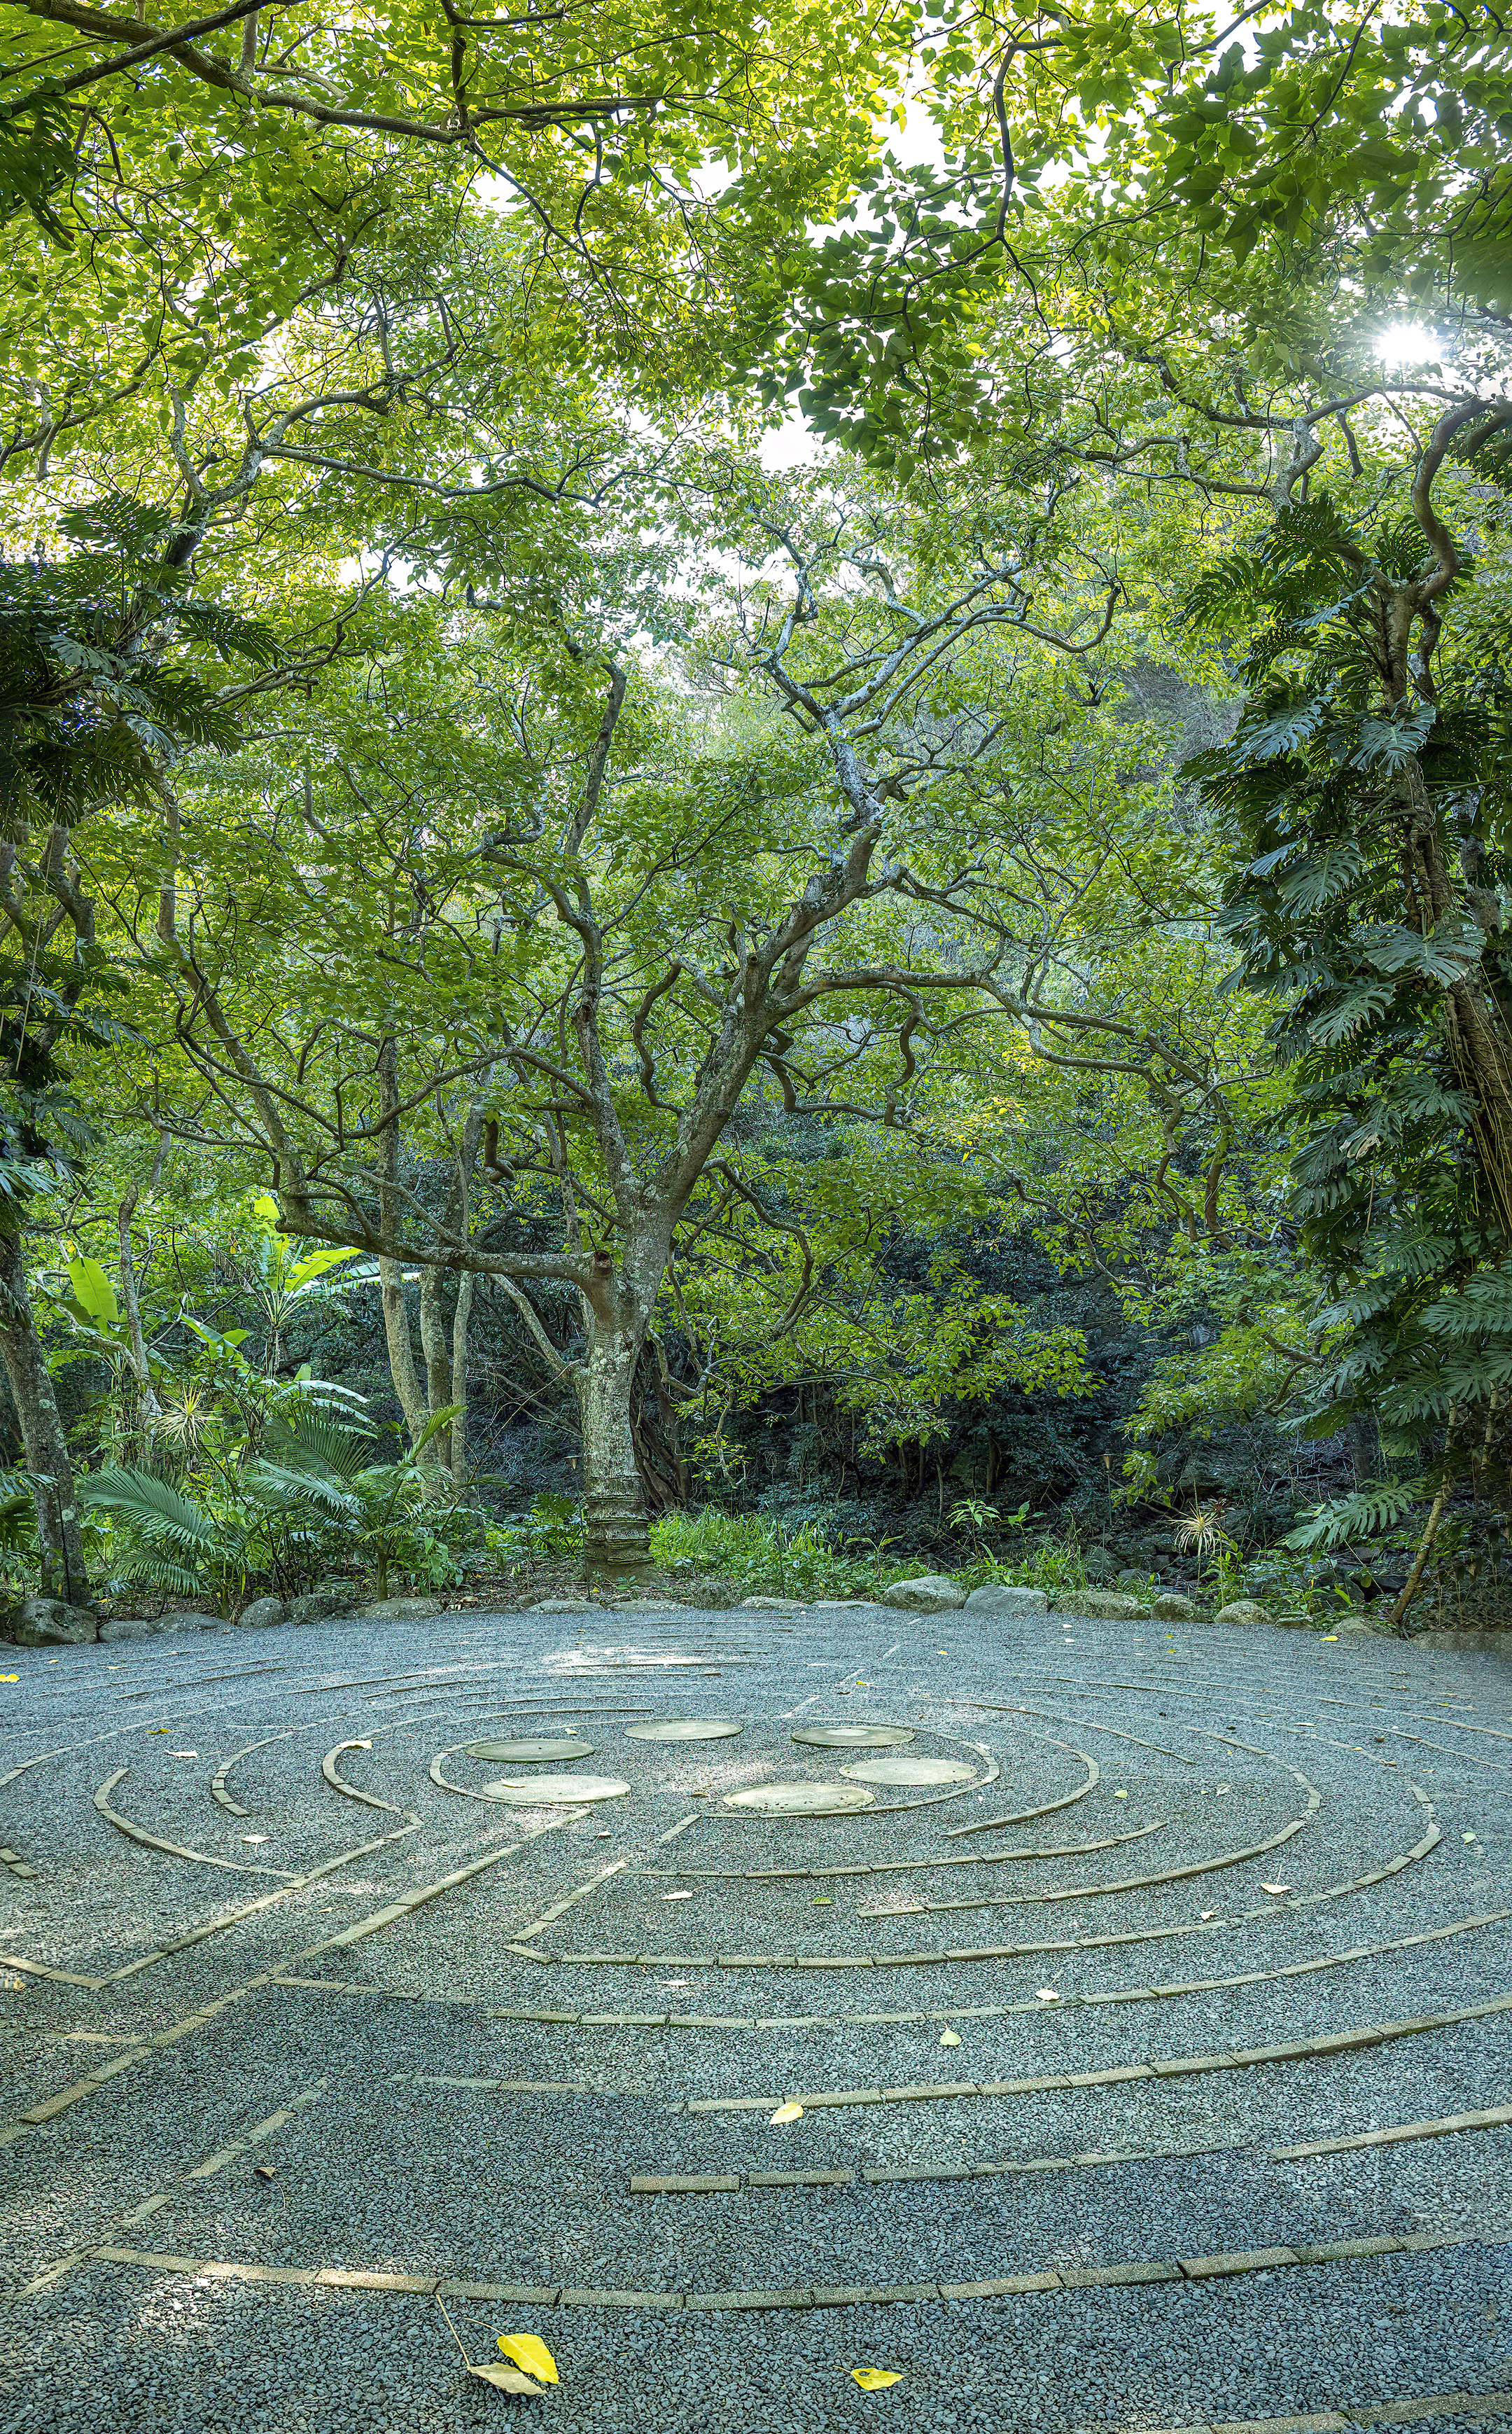 8-photo photomerge Sacred Garden of Maliko medieval 11-circuit labyrinth Kukui forest-clear